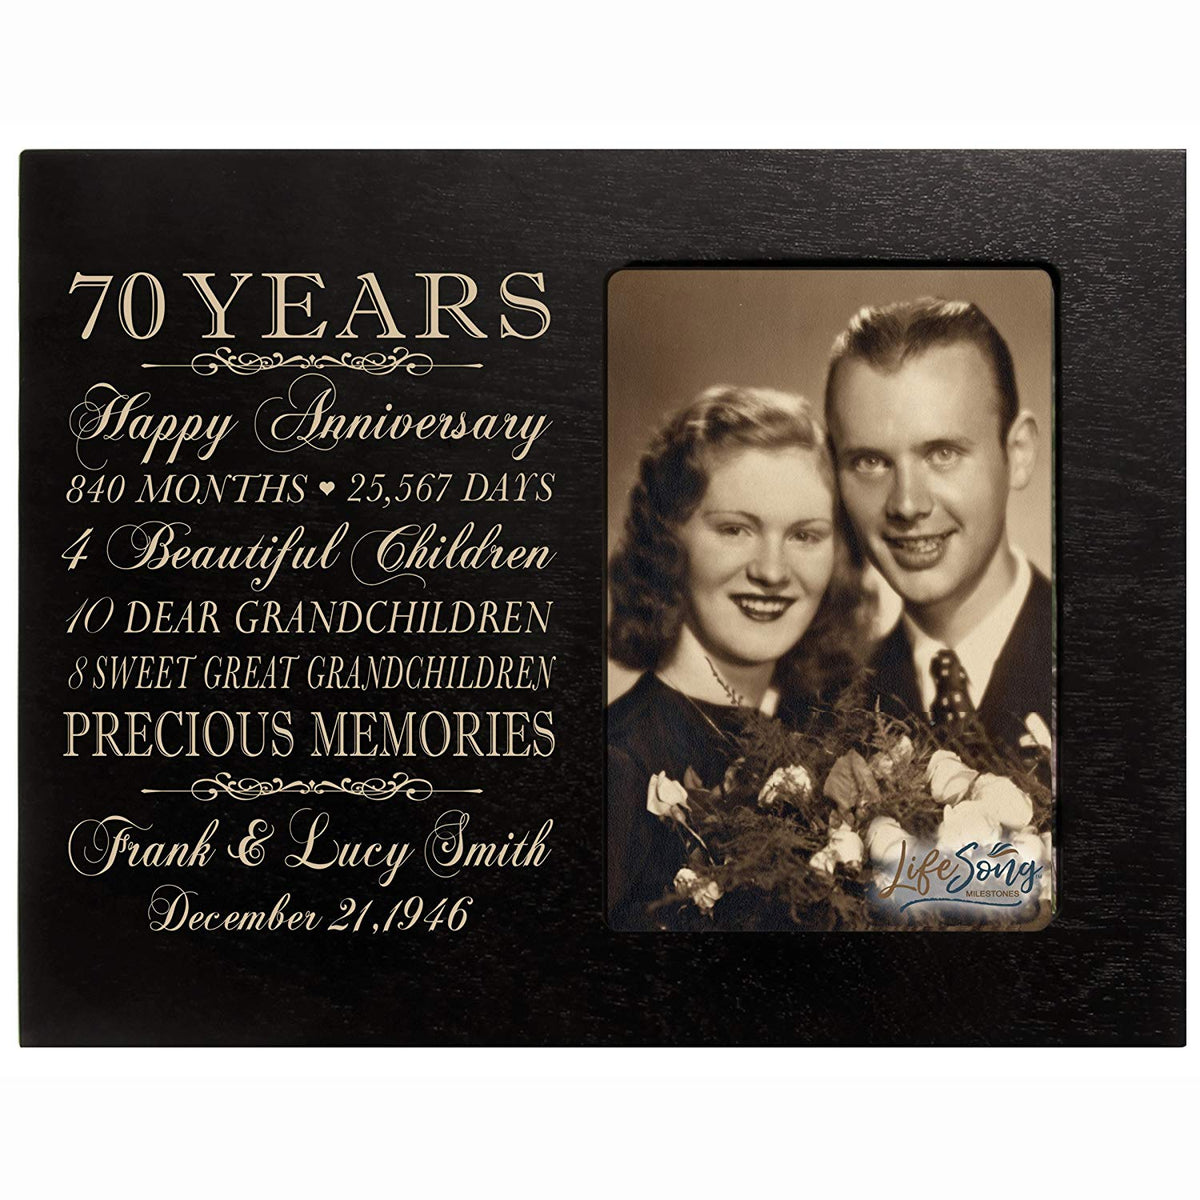 Personalized 70th Wedding Anniversary Picture Frame Gifts for Couples - Precious Memories - LifeSong Milestones